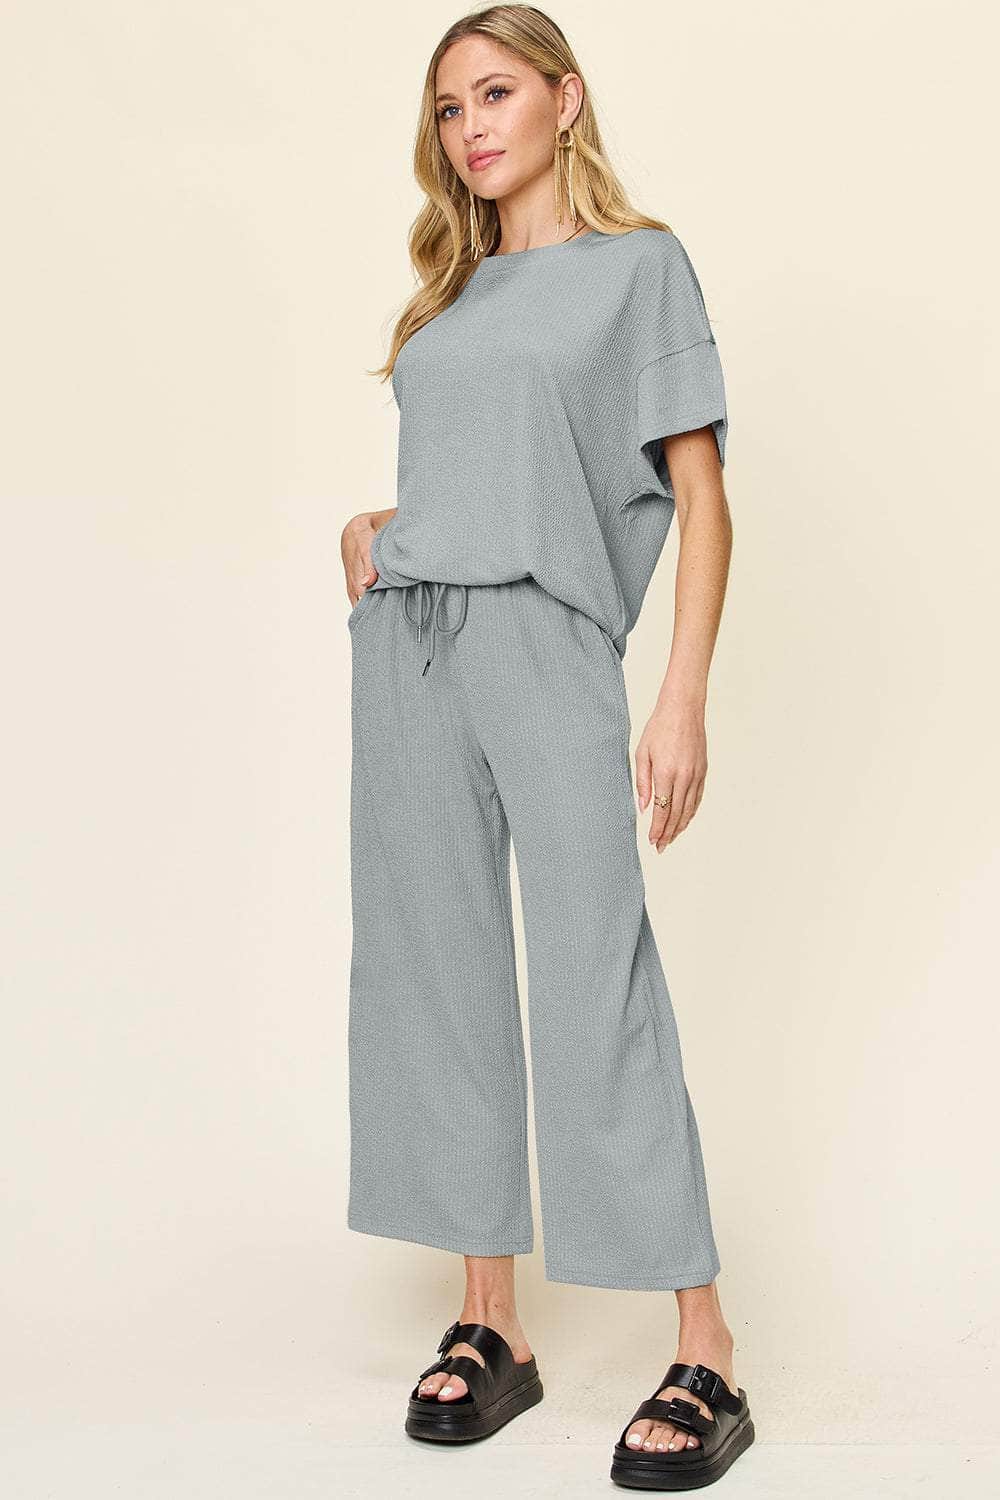 Double Take Full Size Texture Round Neck Short Sleeve T-Shirt and Wide Leg Pants Cloudy Blue / S